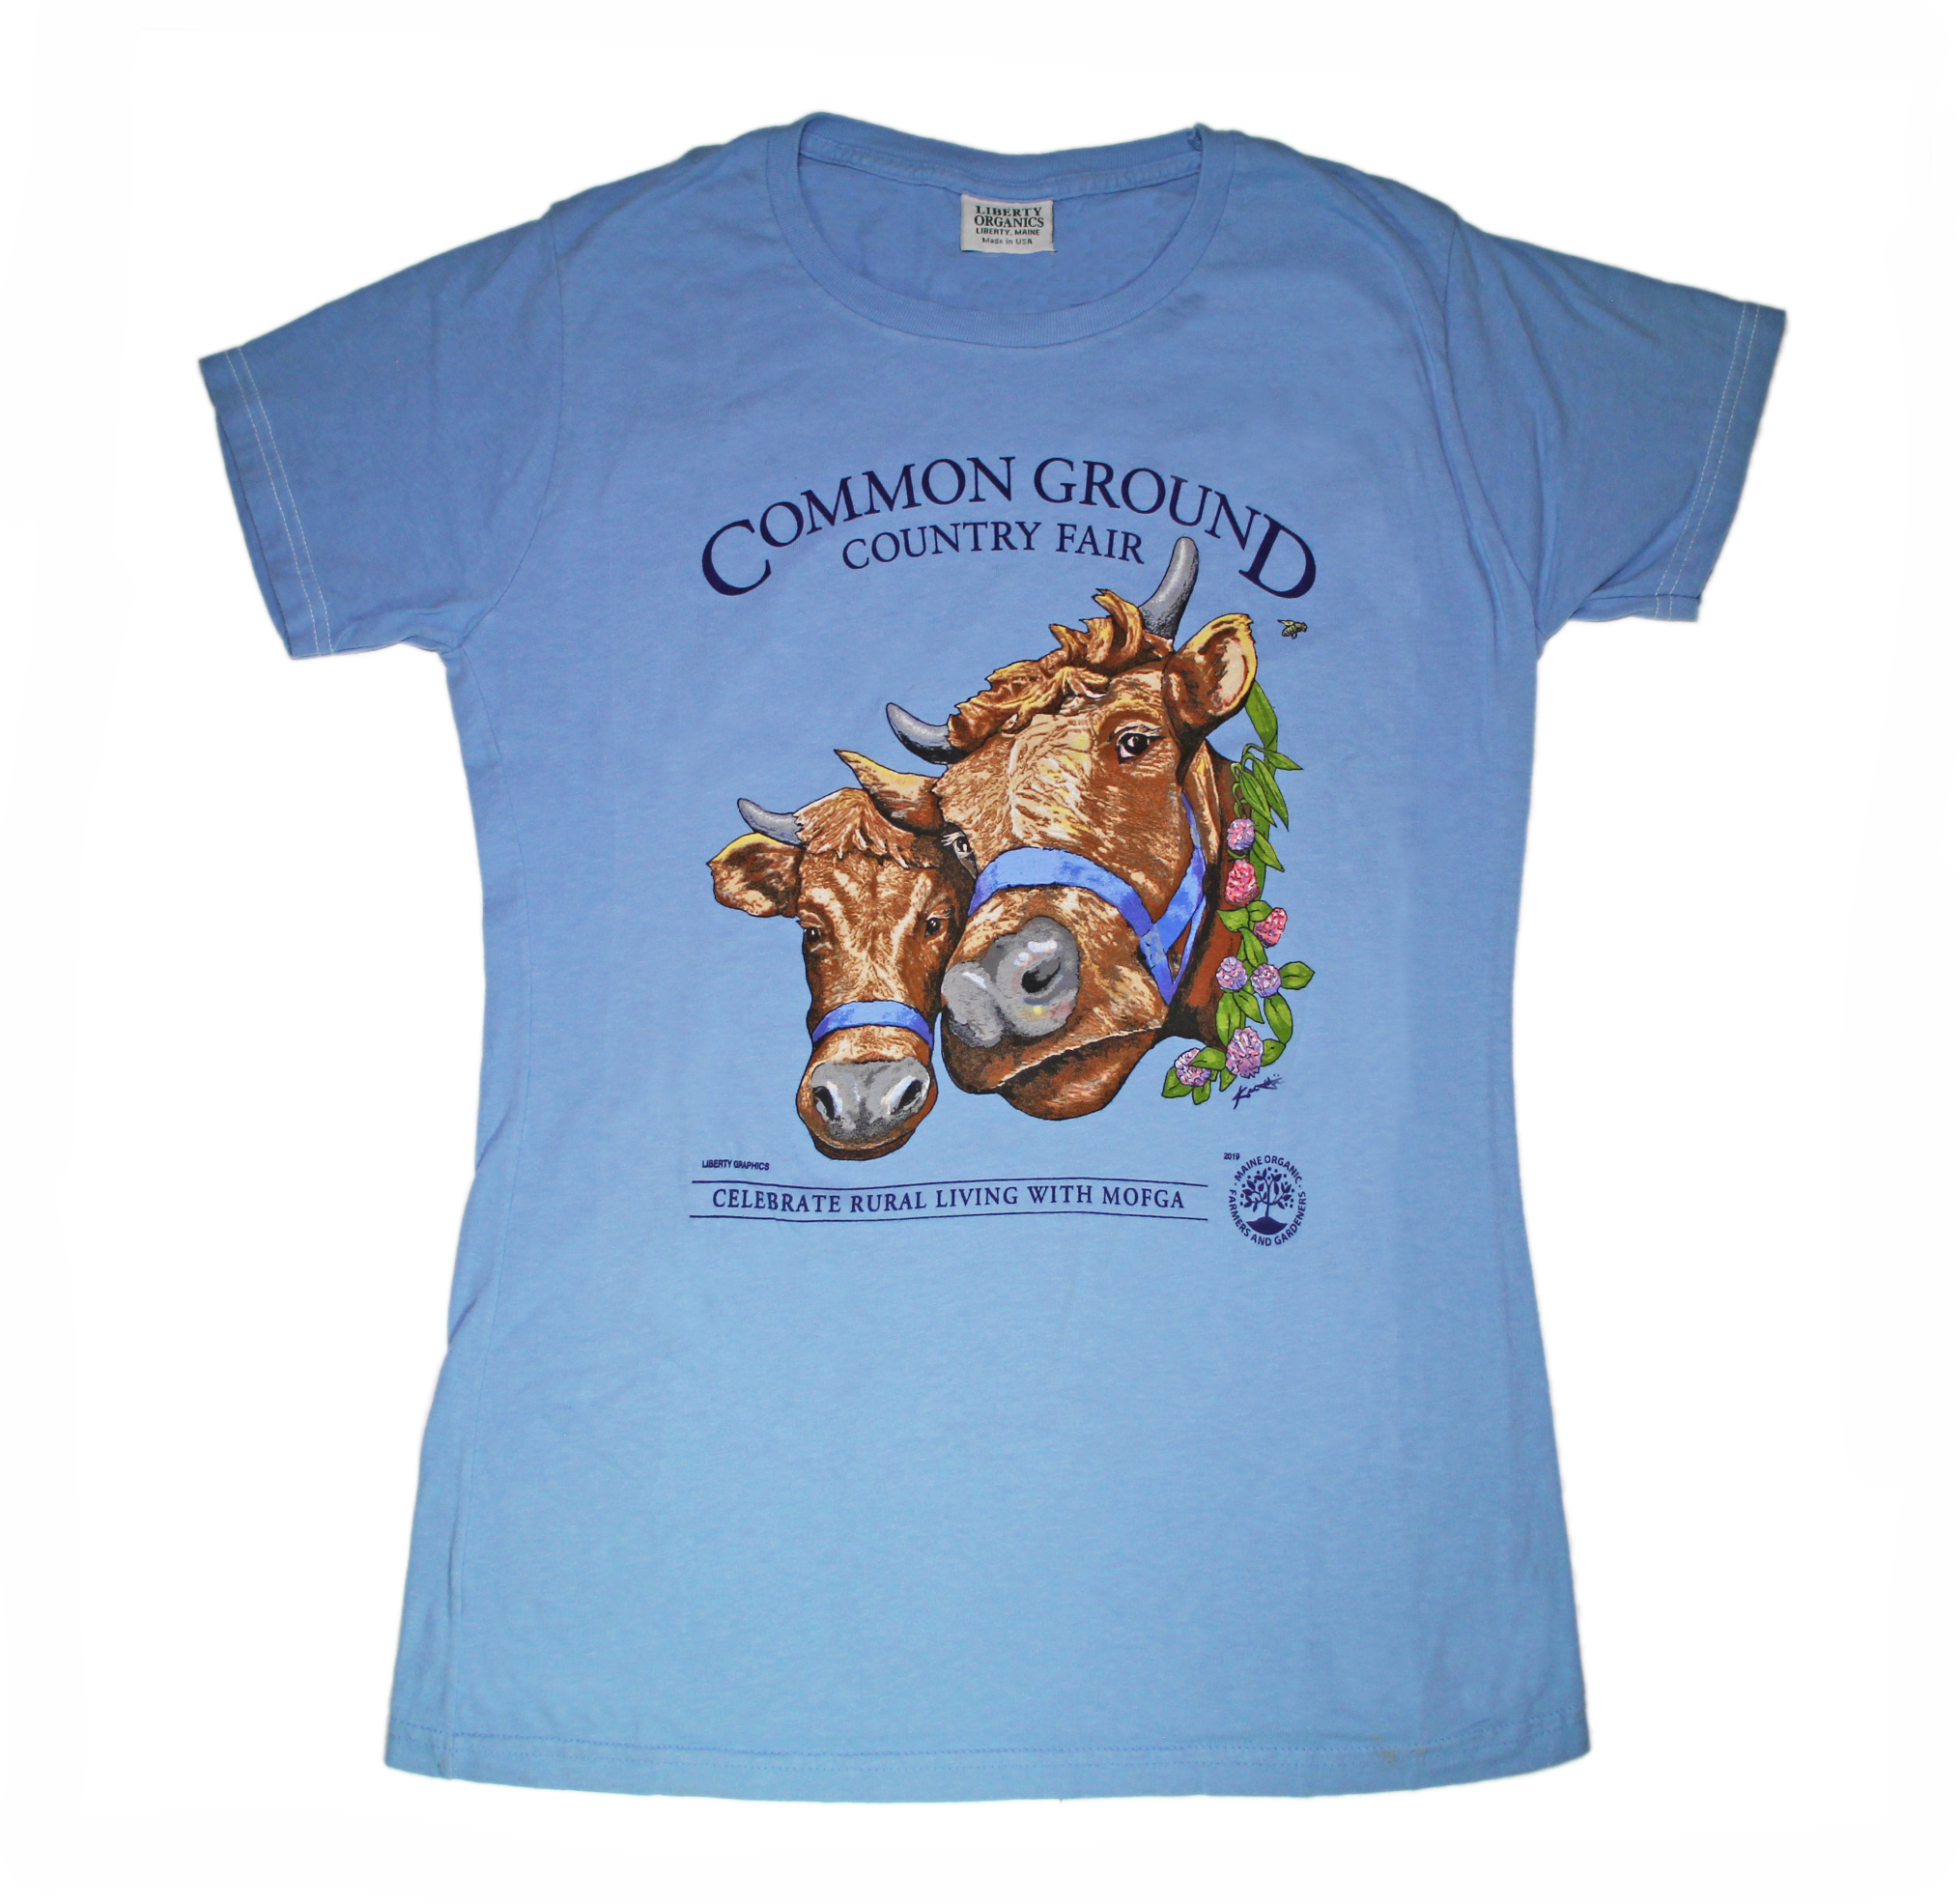 A sky blue shirt with artwork in the center depicting the heads of two shaggy brown cows with horns, wearing blue halters. On the right side of one cow is a viney wreath with small clusters of purple and blush flowers. Black text around art reads “Common Ground Country Fair '' and  “Celebrate Rural Living with MOFGA”. A black MOFGA logo is in the bottom right corner. 